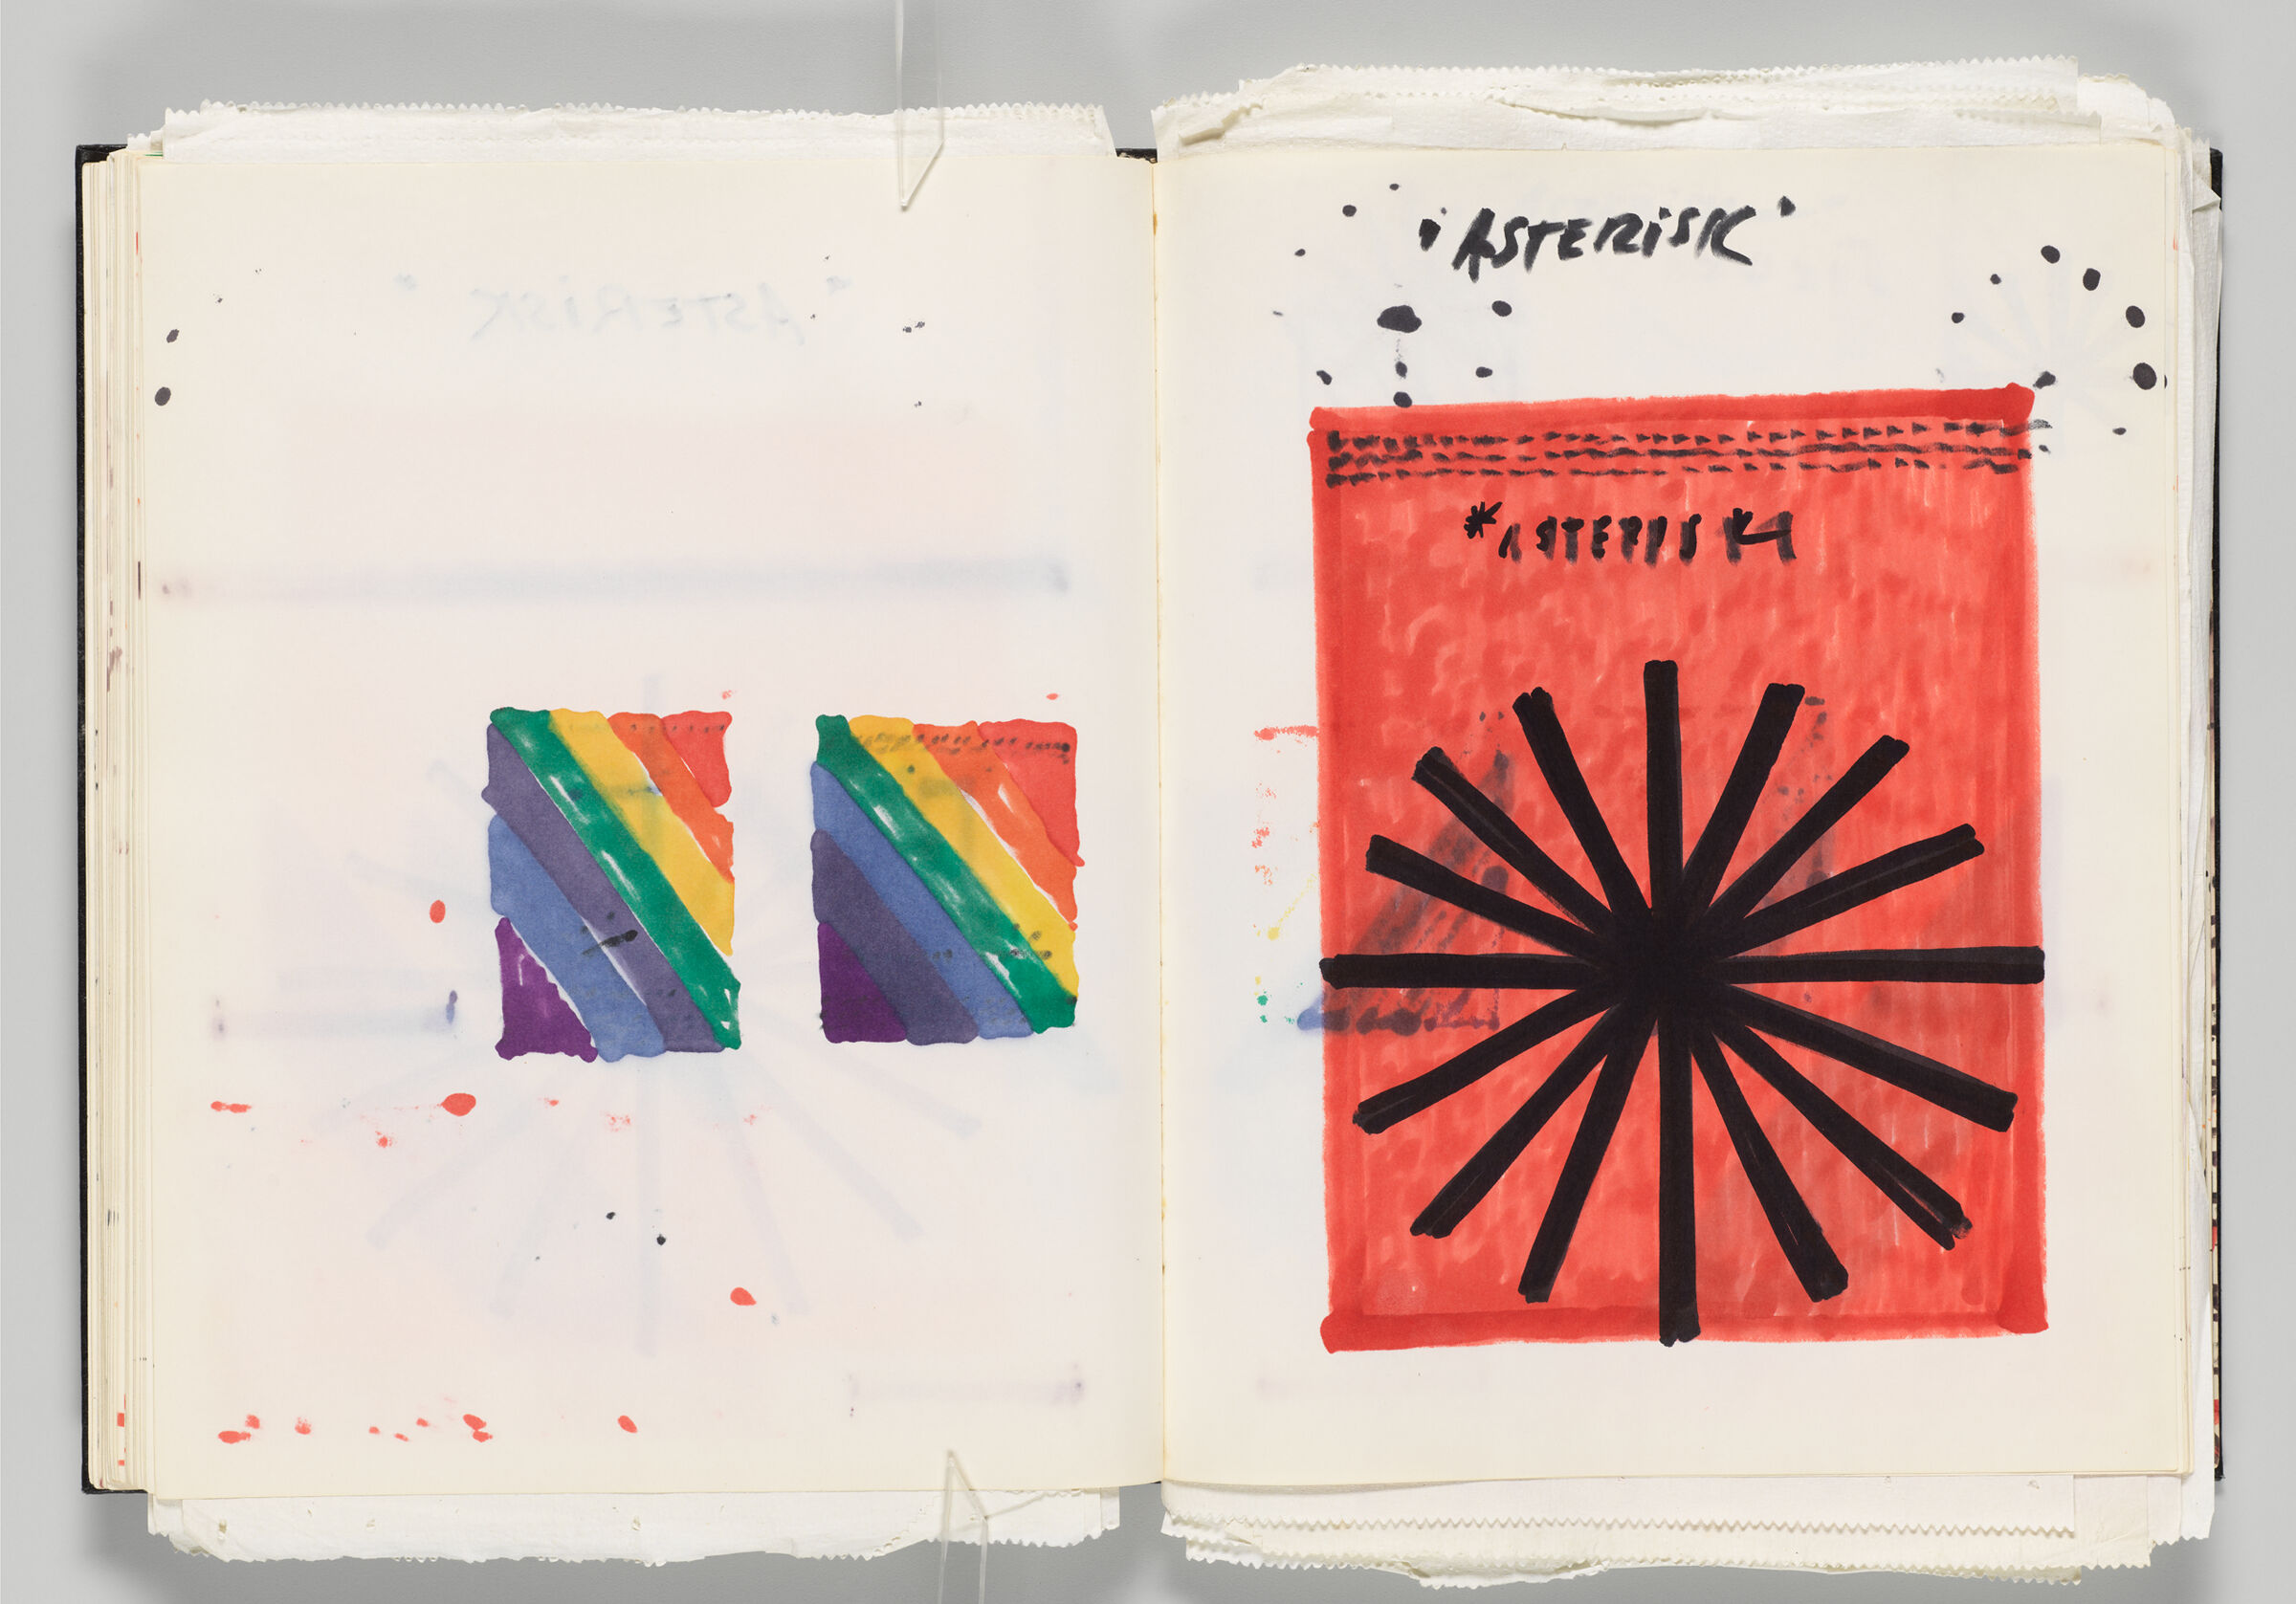 Untitled (Bleed-Through Of Previous Page, Left Page); Untitled (C.a.v.s. Poster Design, Right Page)